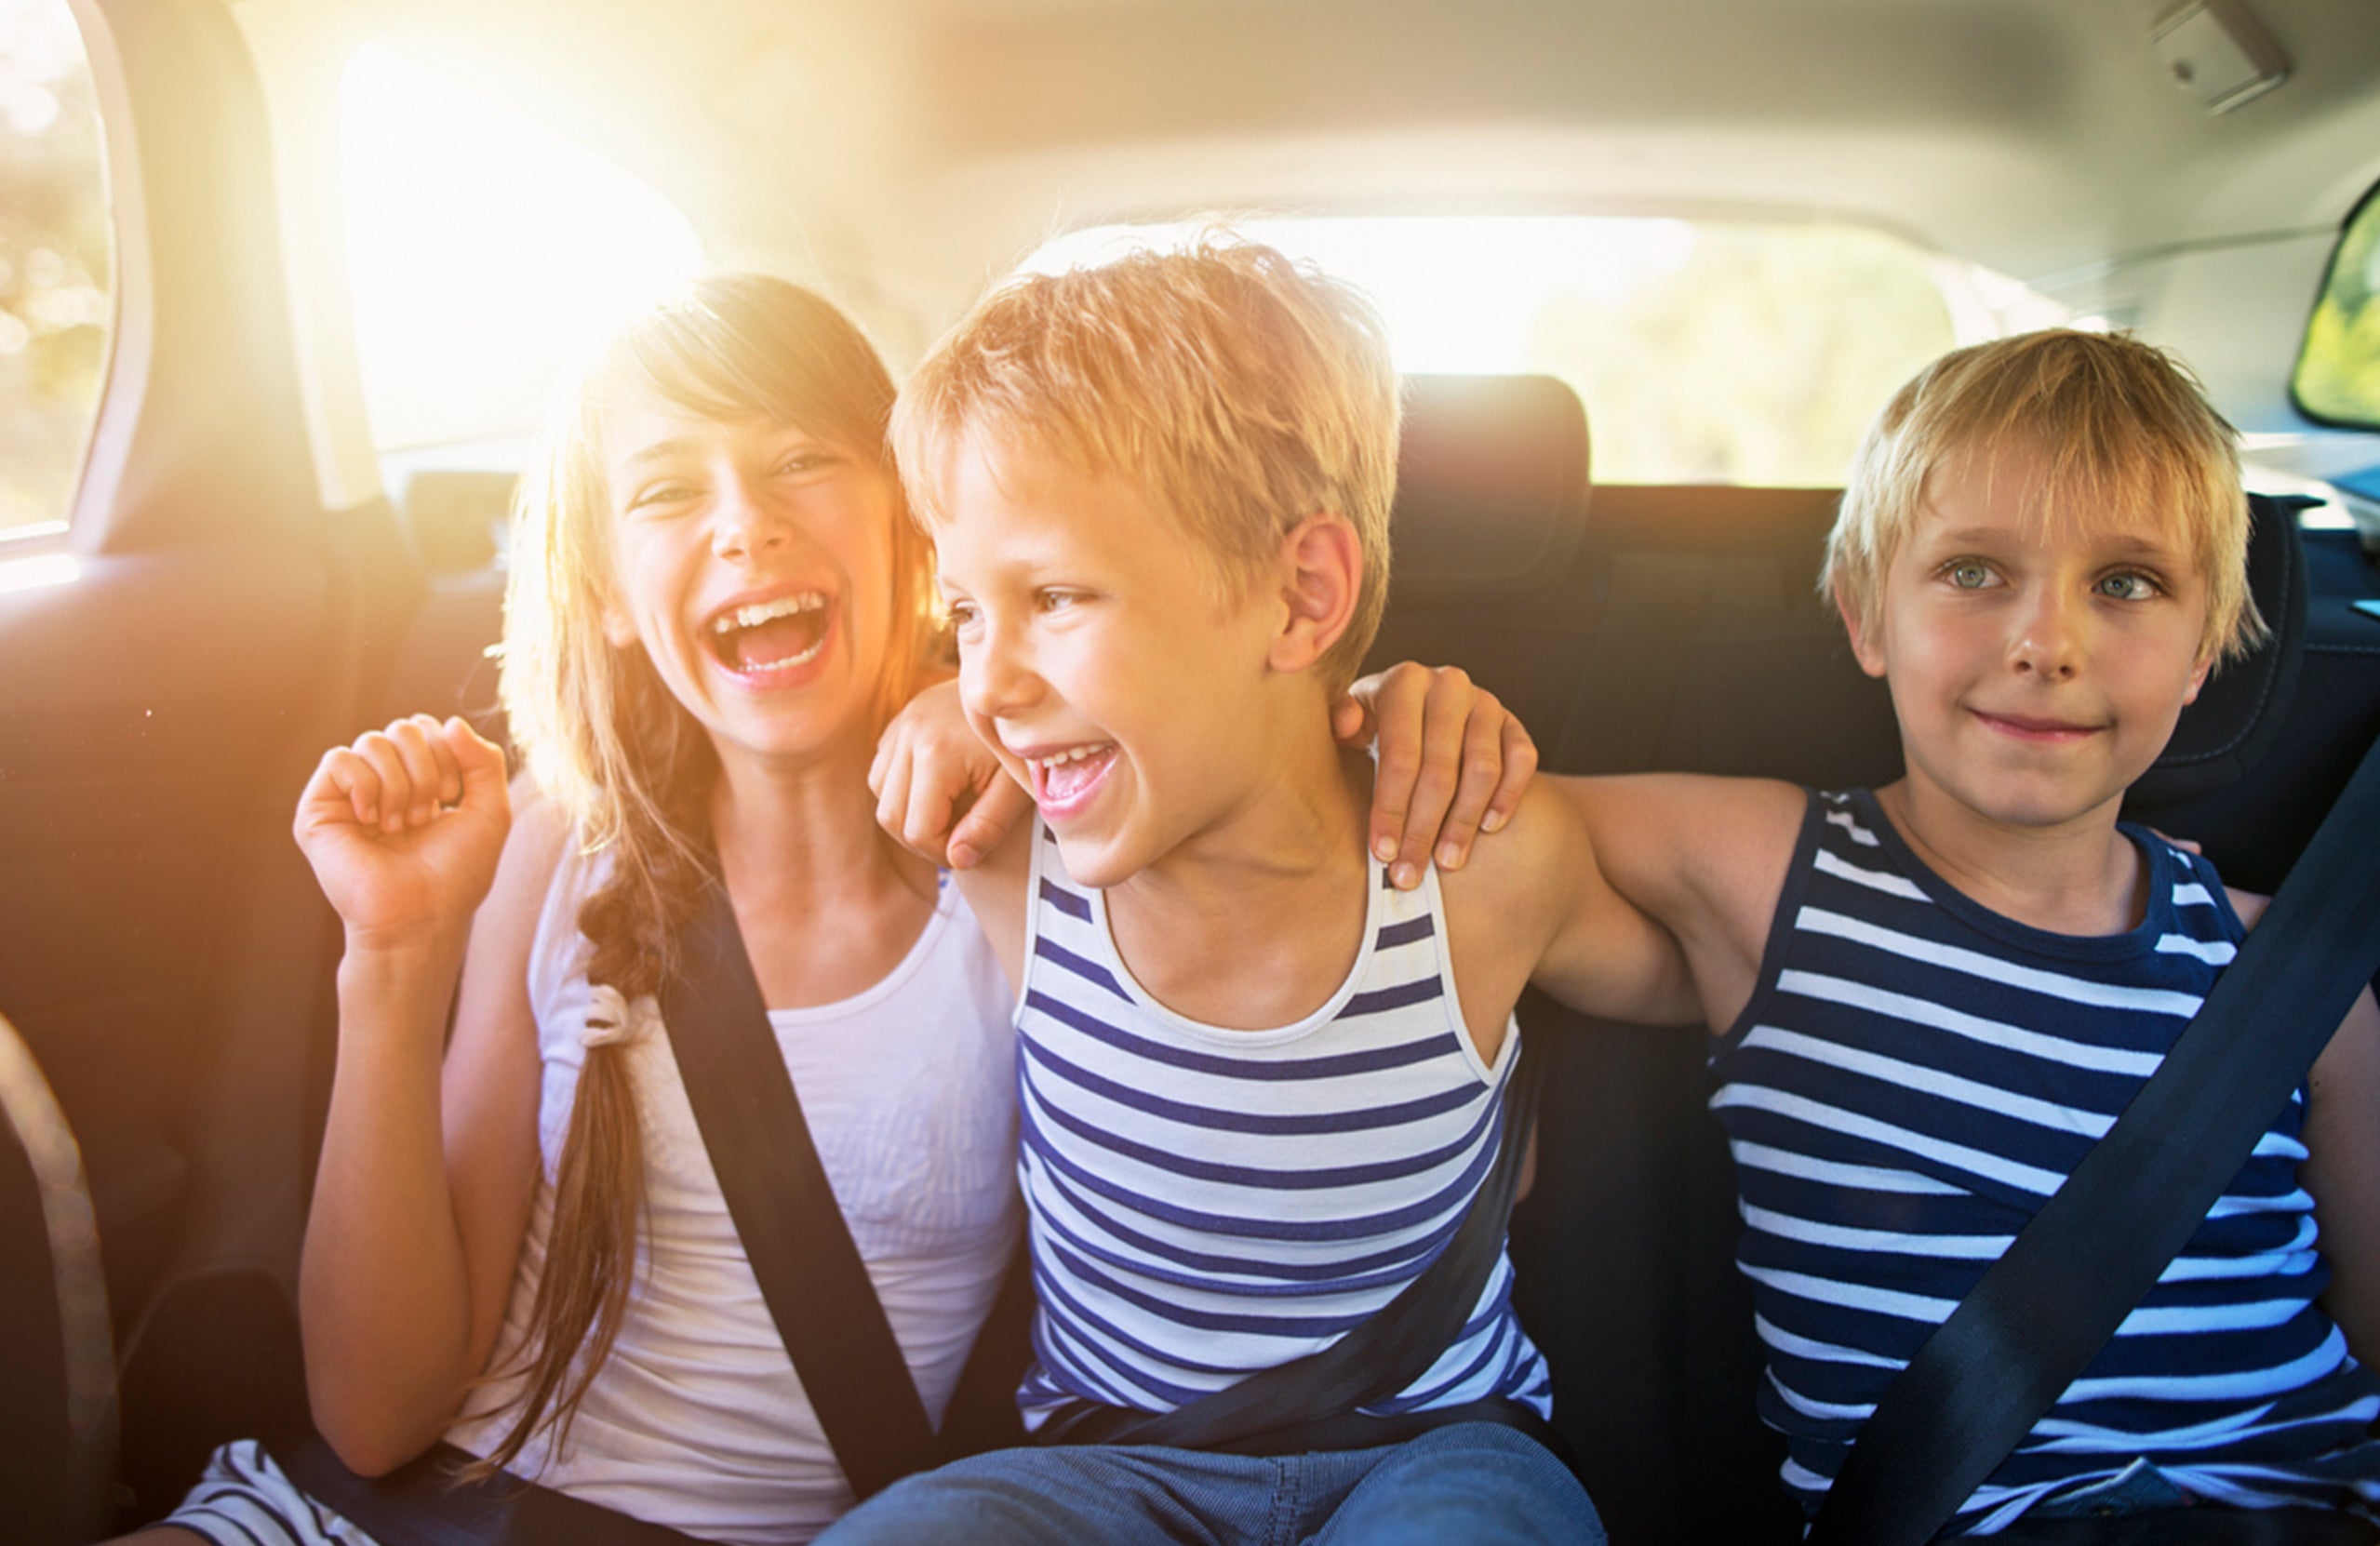 If the thought of hours in the car with your kids doesn't thrill you, here are some tips that can make your summer road trip downright enjoyable.